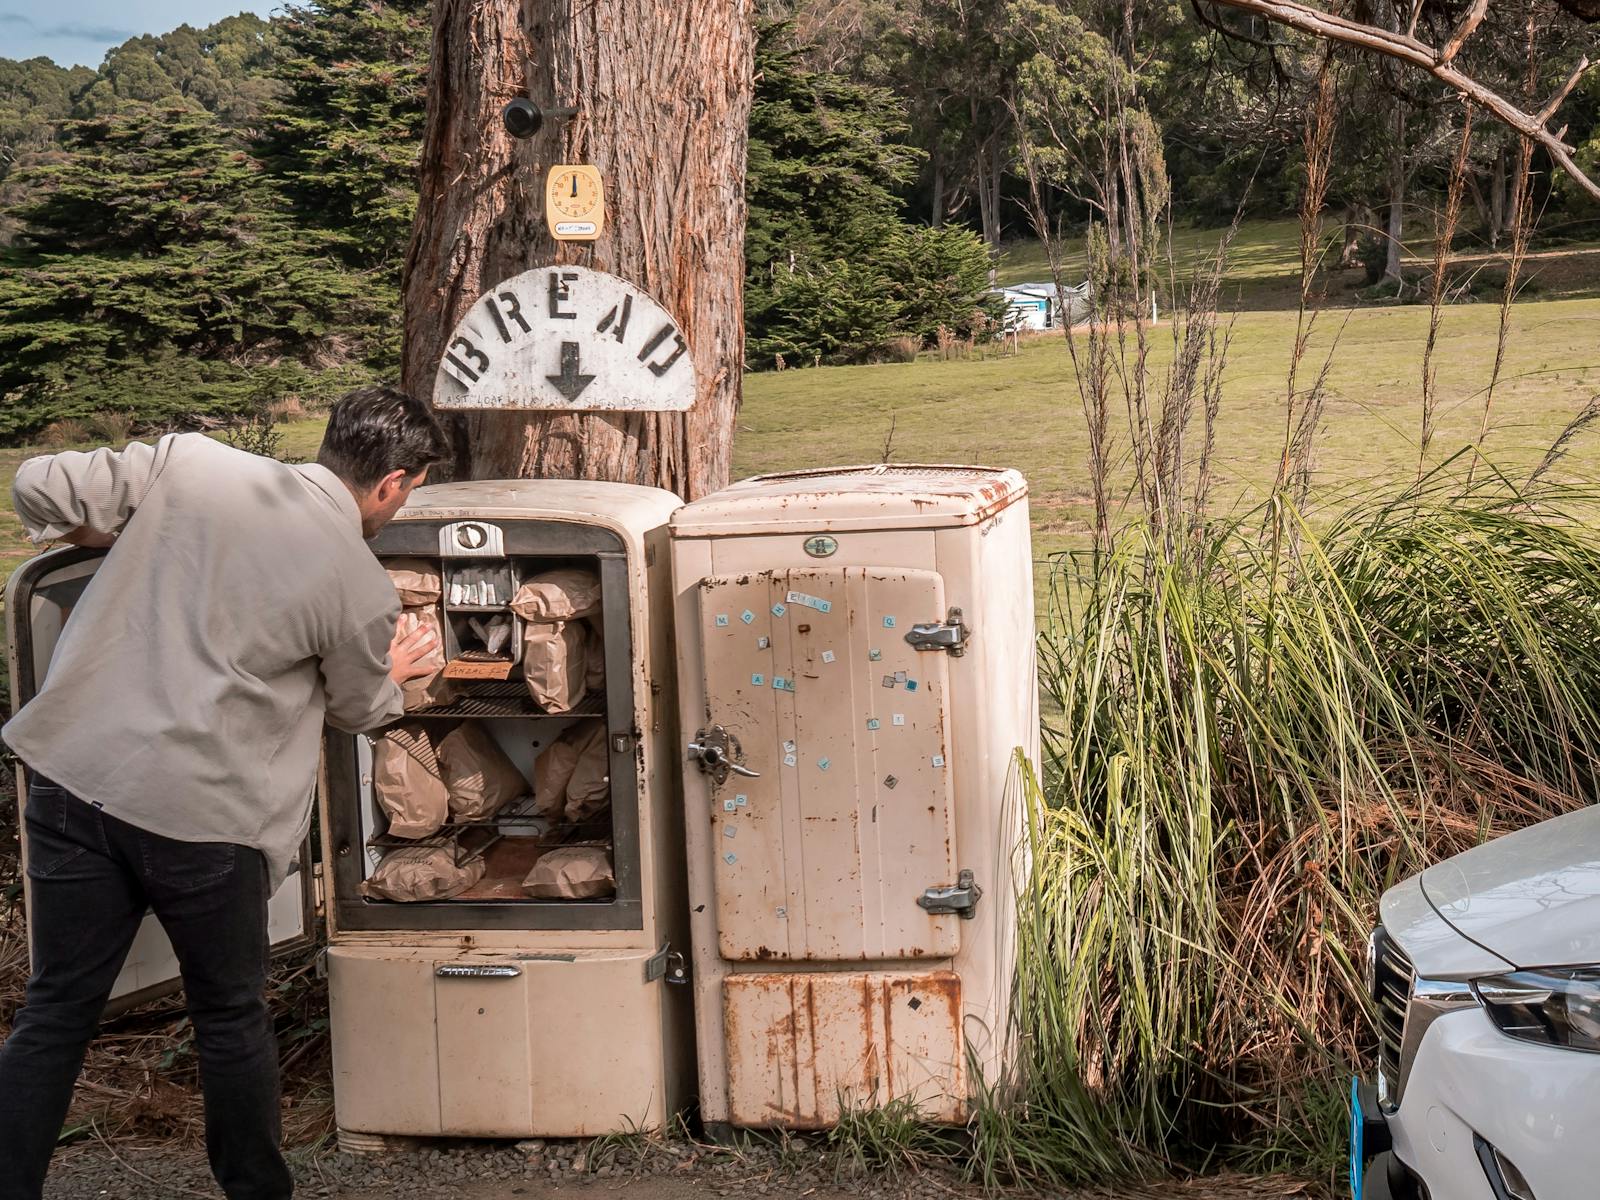 sheepwashbay is  home to the elusive bruny baker...enjoy hot woodfired sourdough when you stay